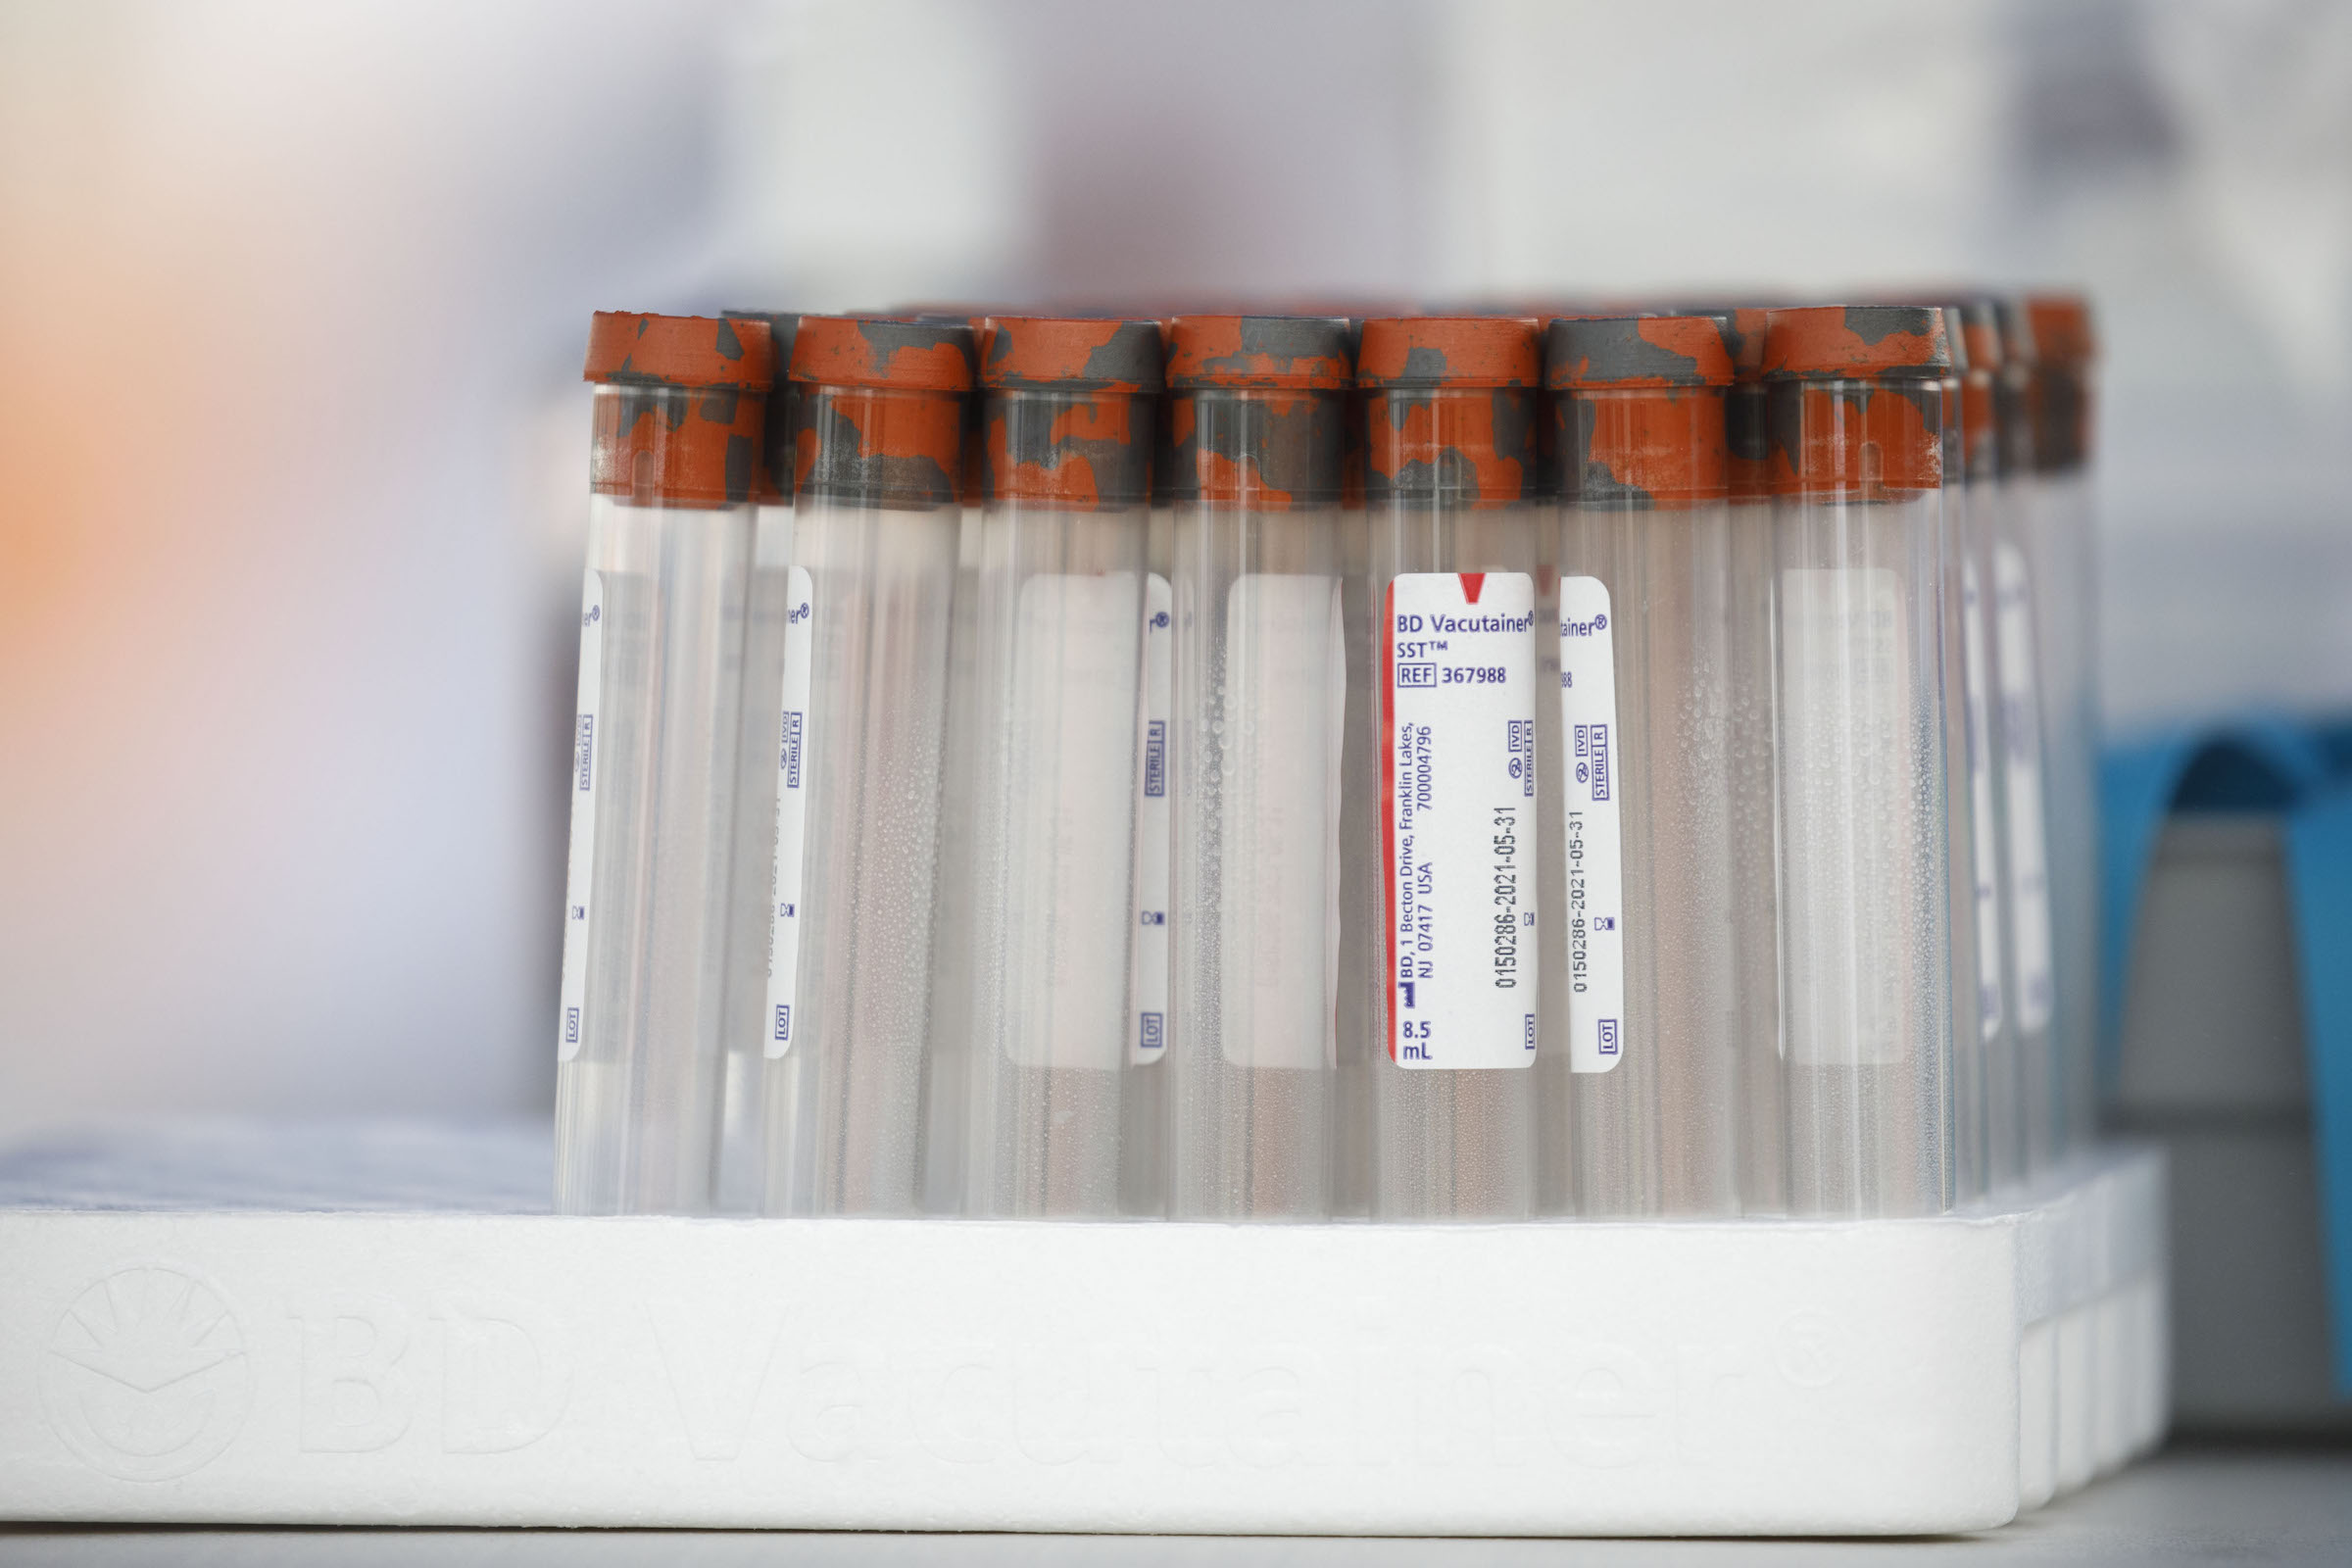 REmpty Becton, Dickinson &amp; Co. (BD) vacutainer tubes for blood samples stand at a GUARDaHEART Foundation testing site in Los Angeles, California, U.S., on Aug. 5, 2020.